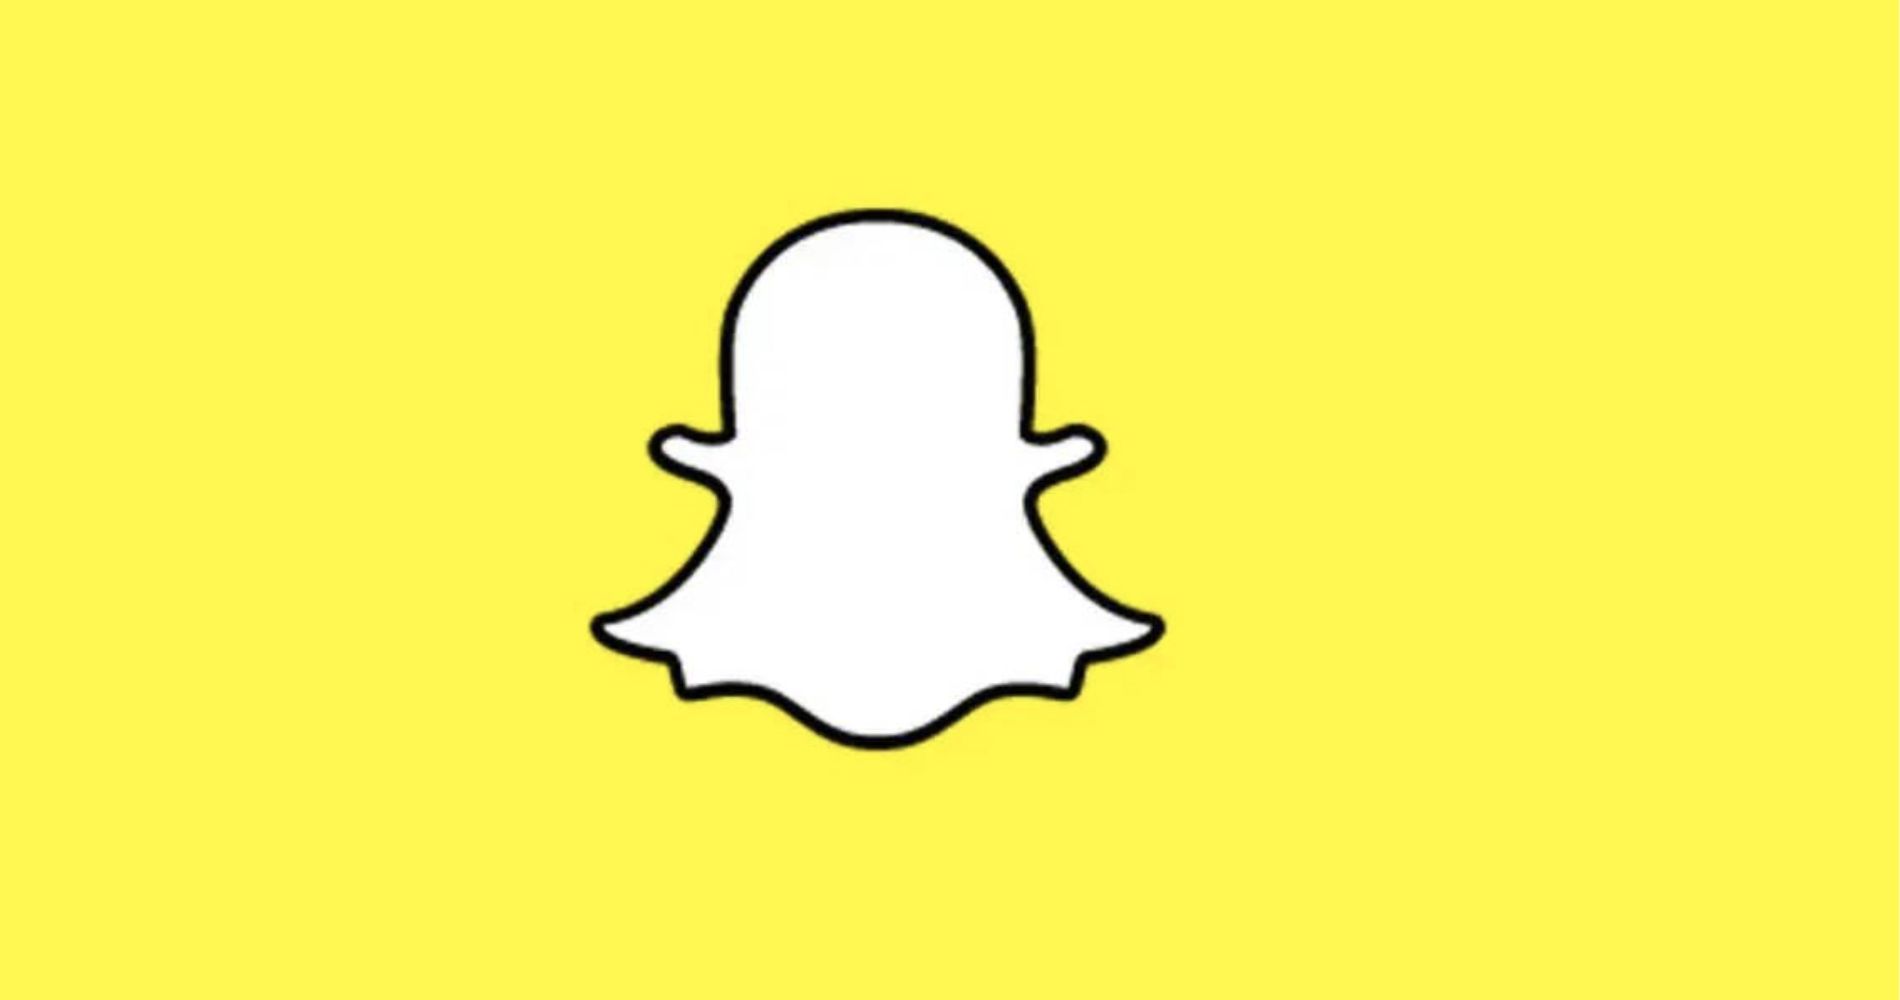 AR Meets Music: Snapchat And Republic Records Collaborate For Virtual